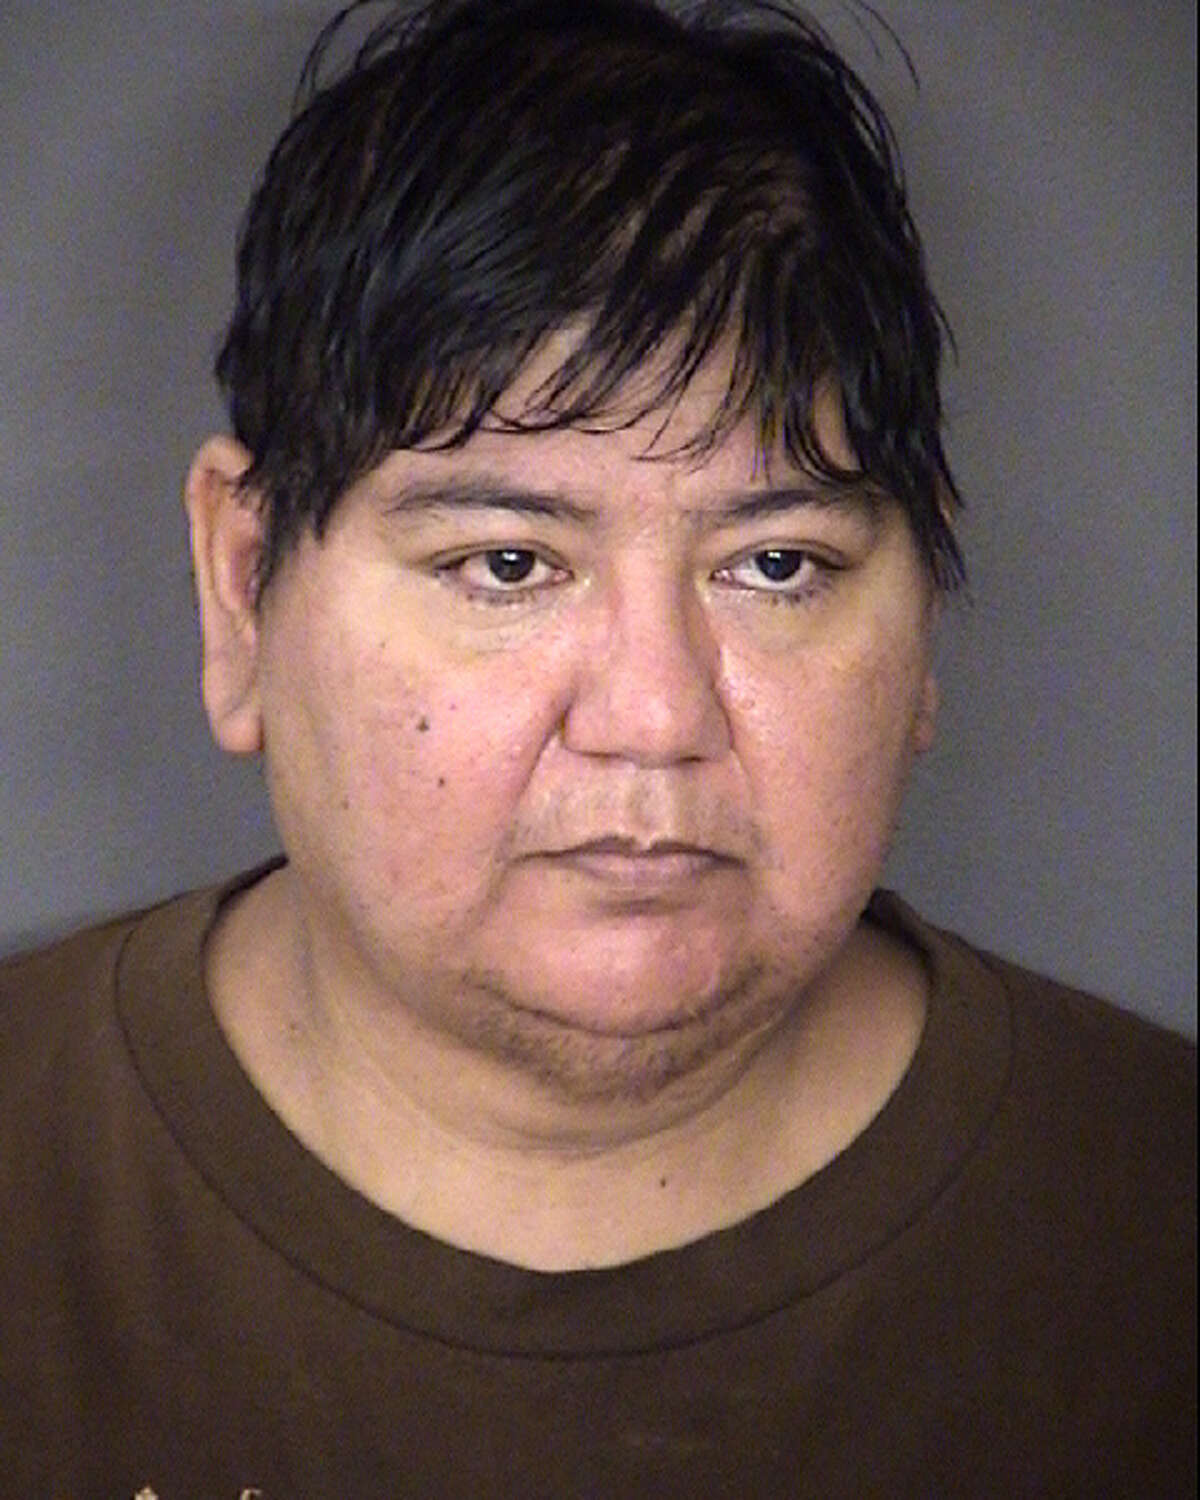 June 1: Laura Castillo, 46, was transferred to the Bexar County Jail after a charge of aggravated sexual assault of a child. Police in San Juan, Texas arrested Laura and husband Eusebio after allegedly committing numerous rapes and assaults against Abigail Alvarado, the couple's adopted daughter and niece. Three children were born from the alleged rapes.